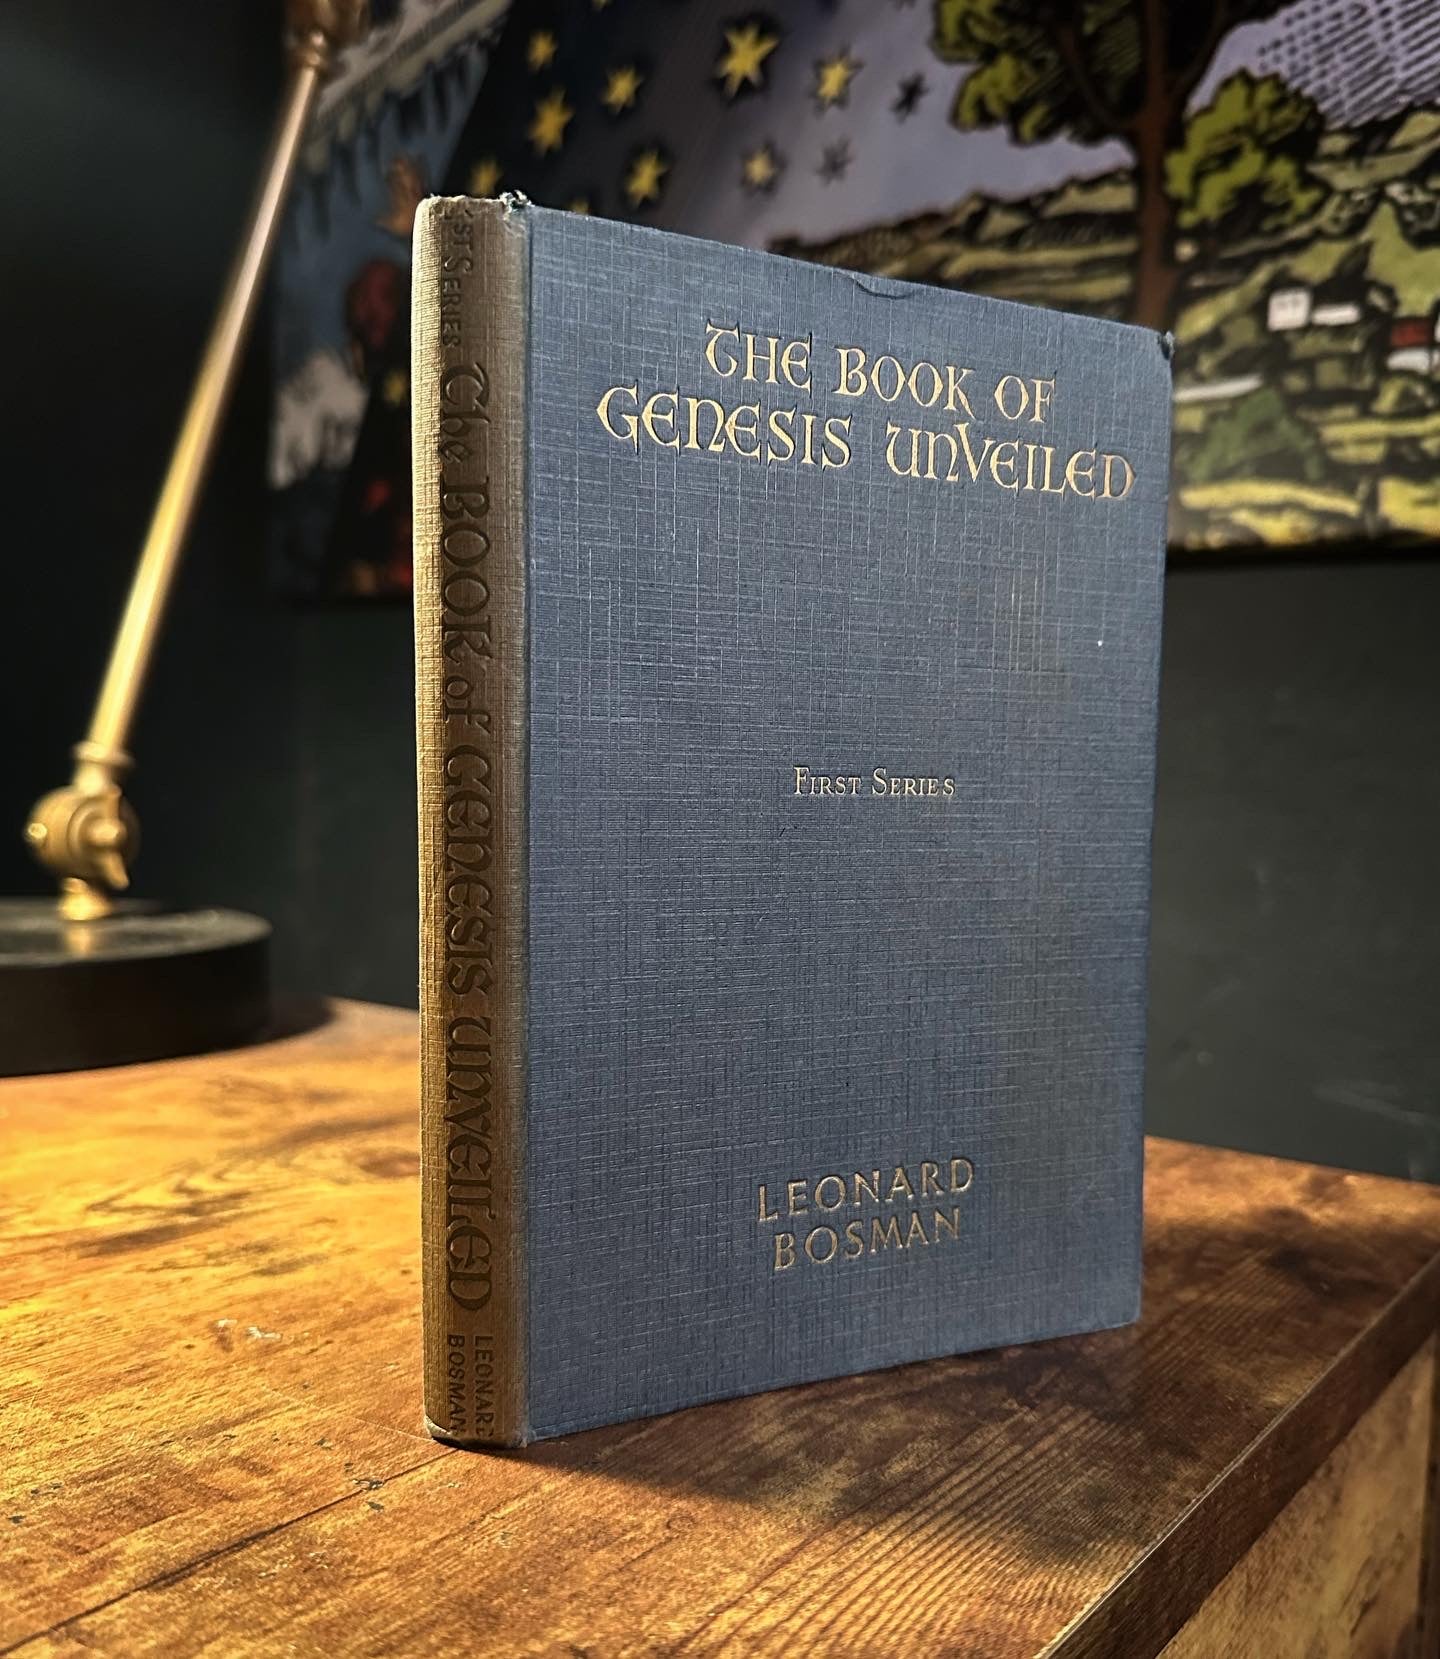 The Book of Genesis Unveiled by Leonard Bosman